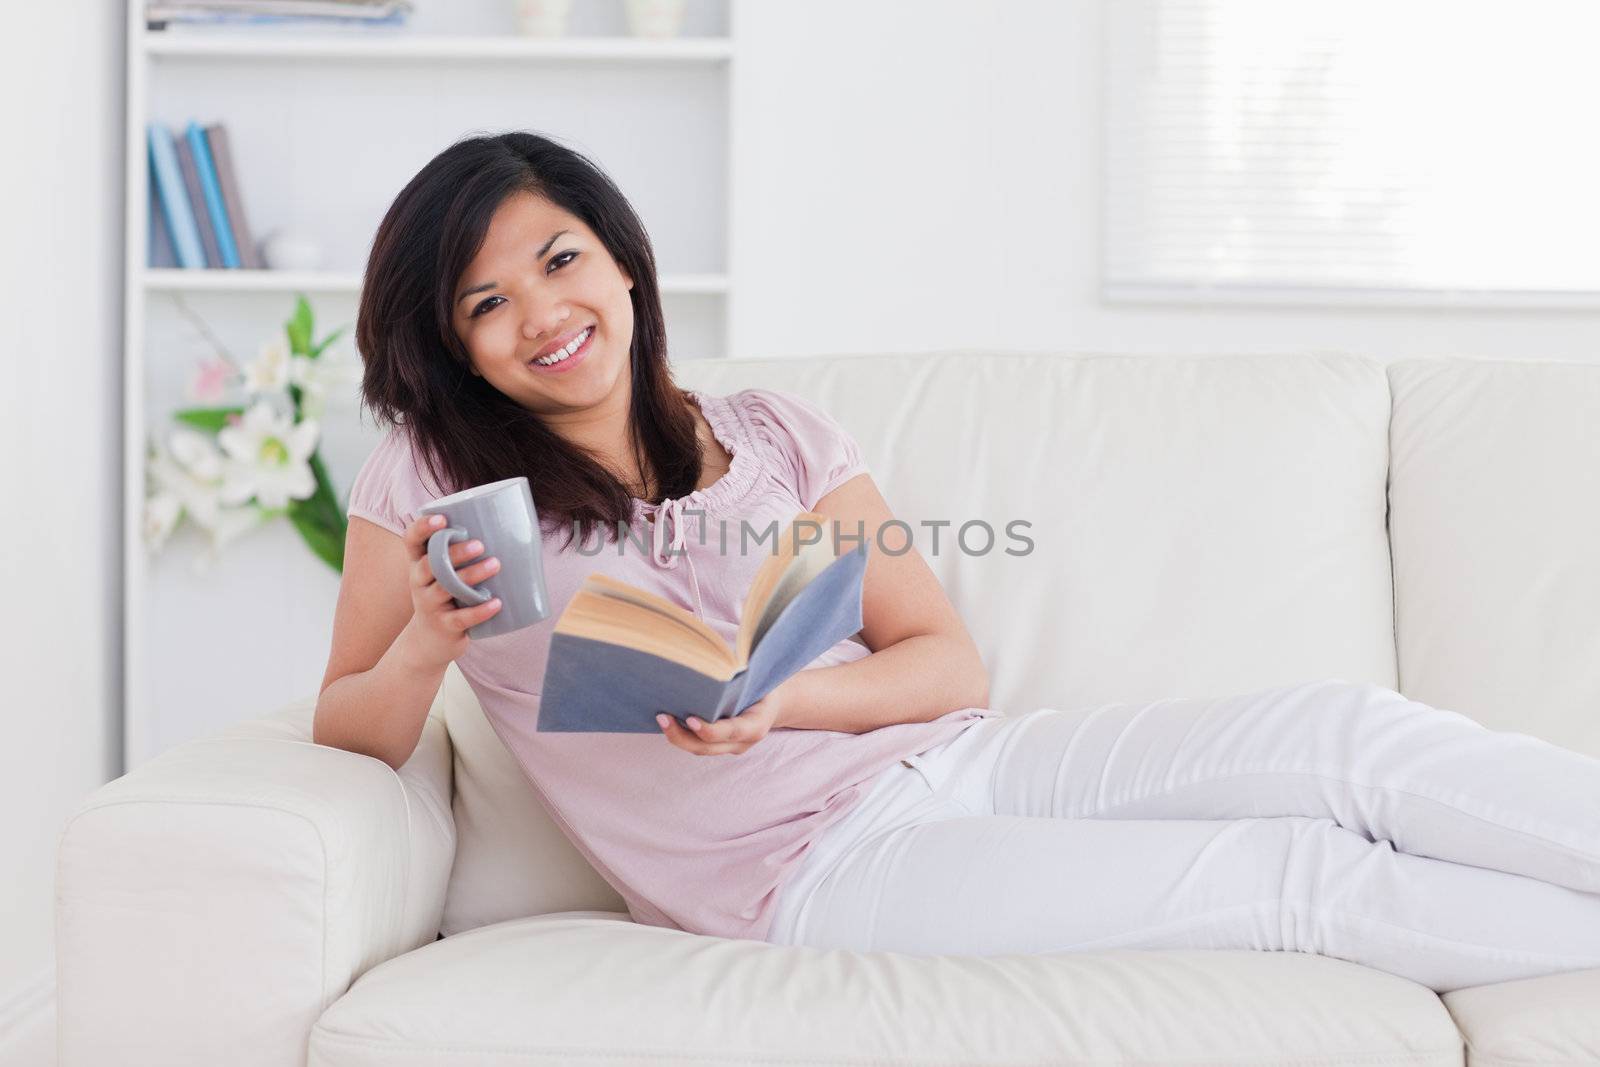 Smiling woman holding a book and a mug while lying on a couch in a living room